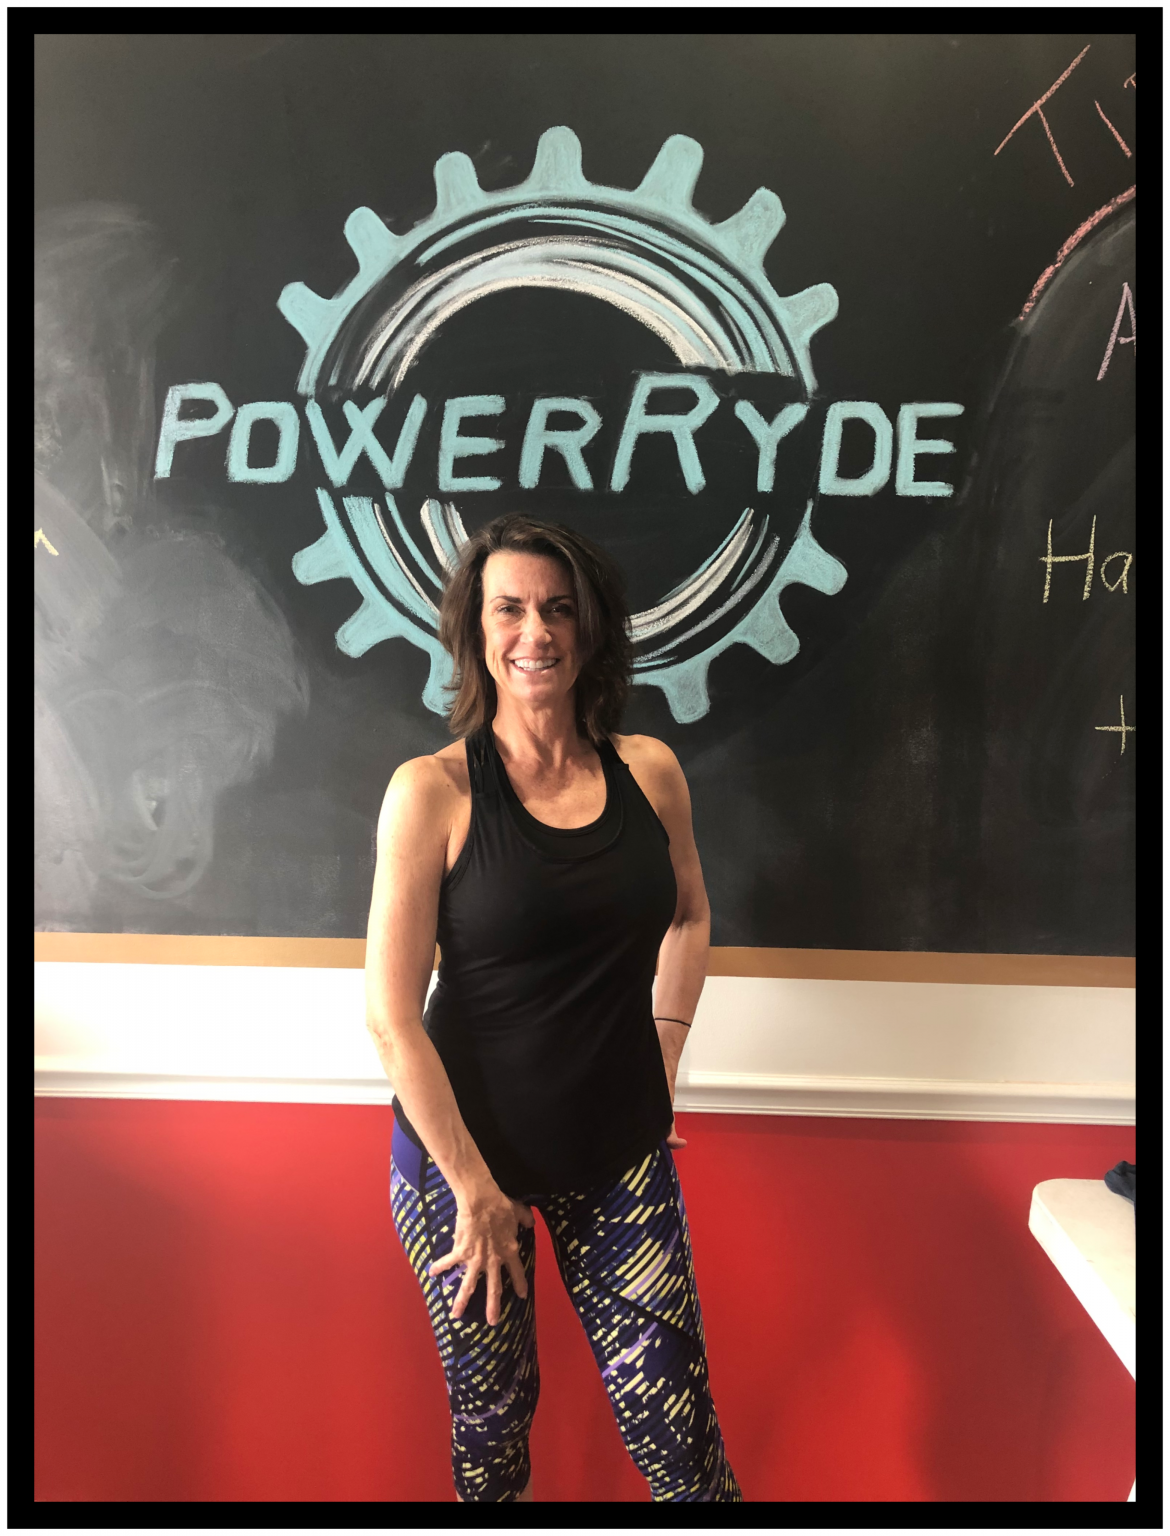 Anne Neuville in front of chalk PowerRyde logo